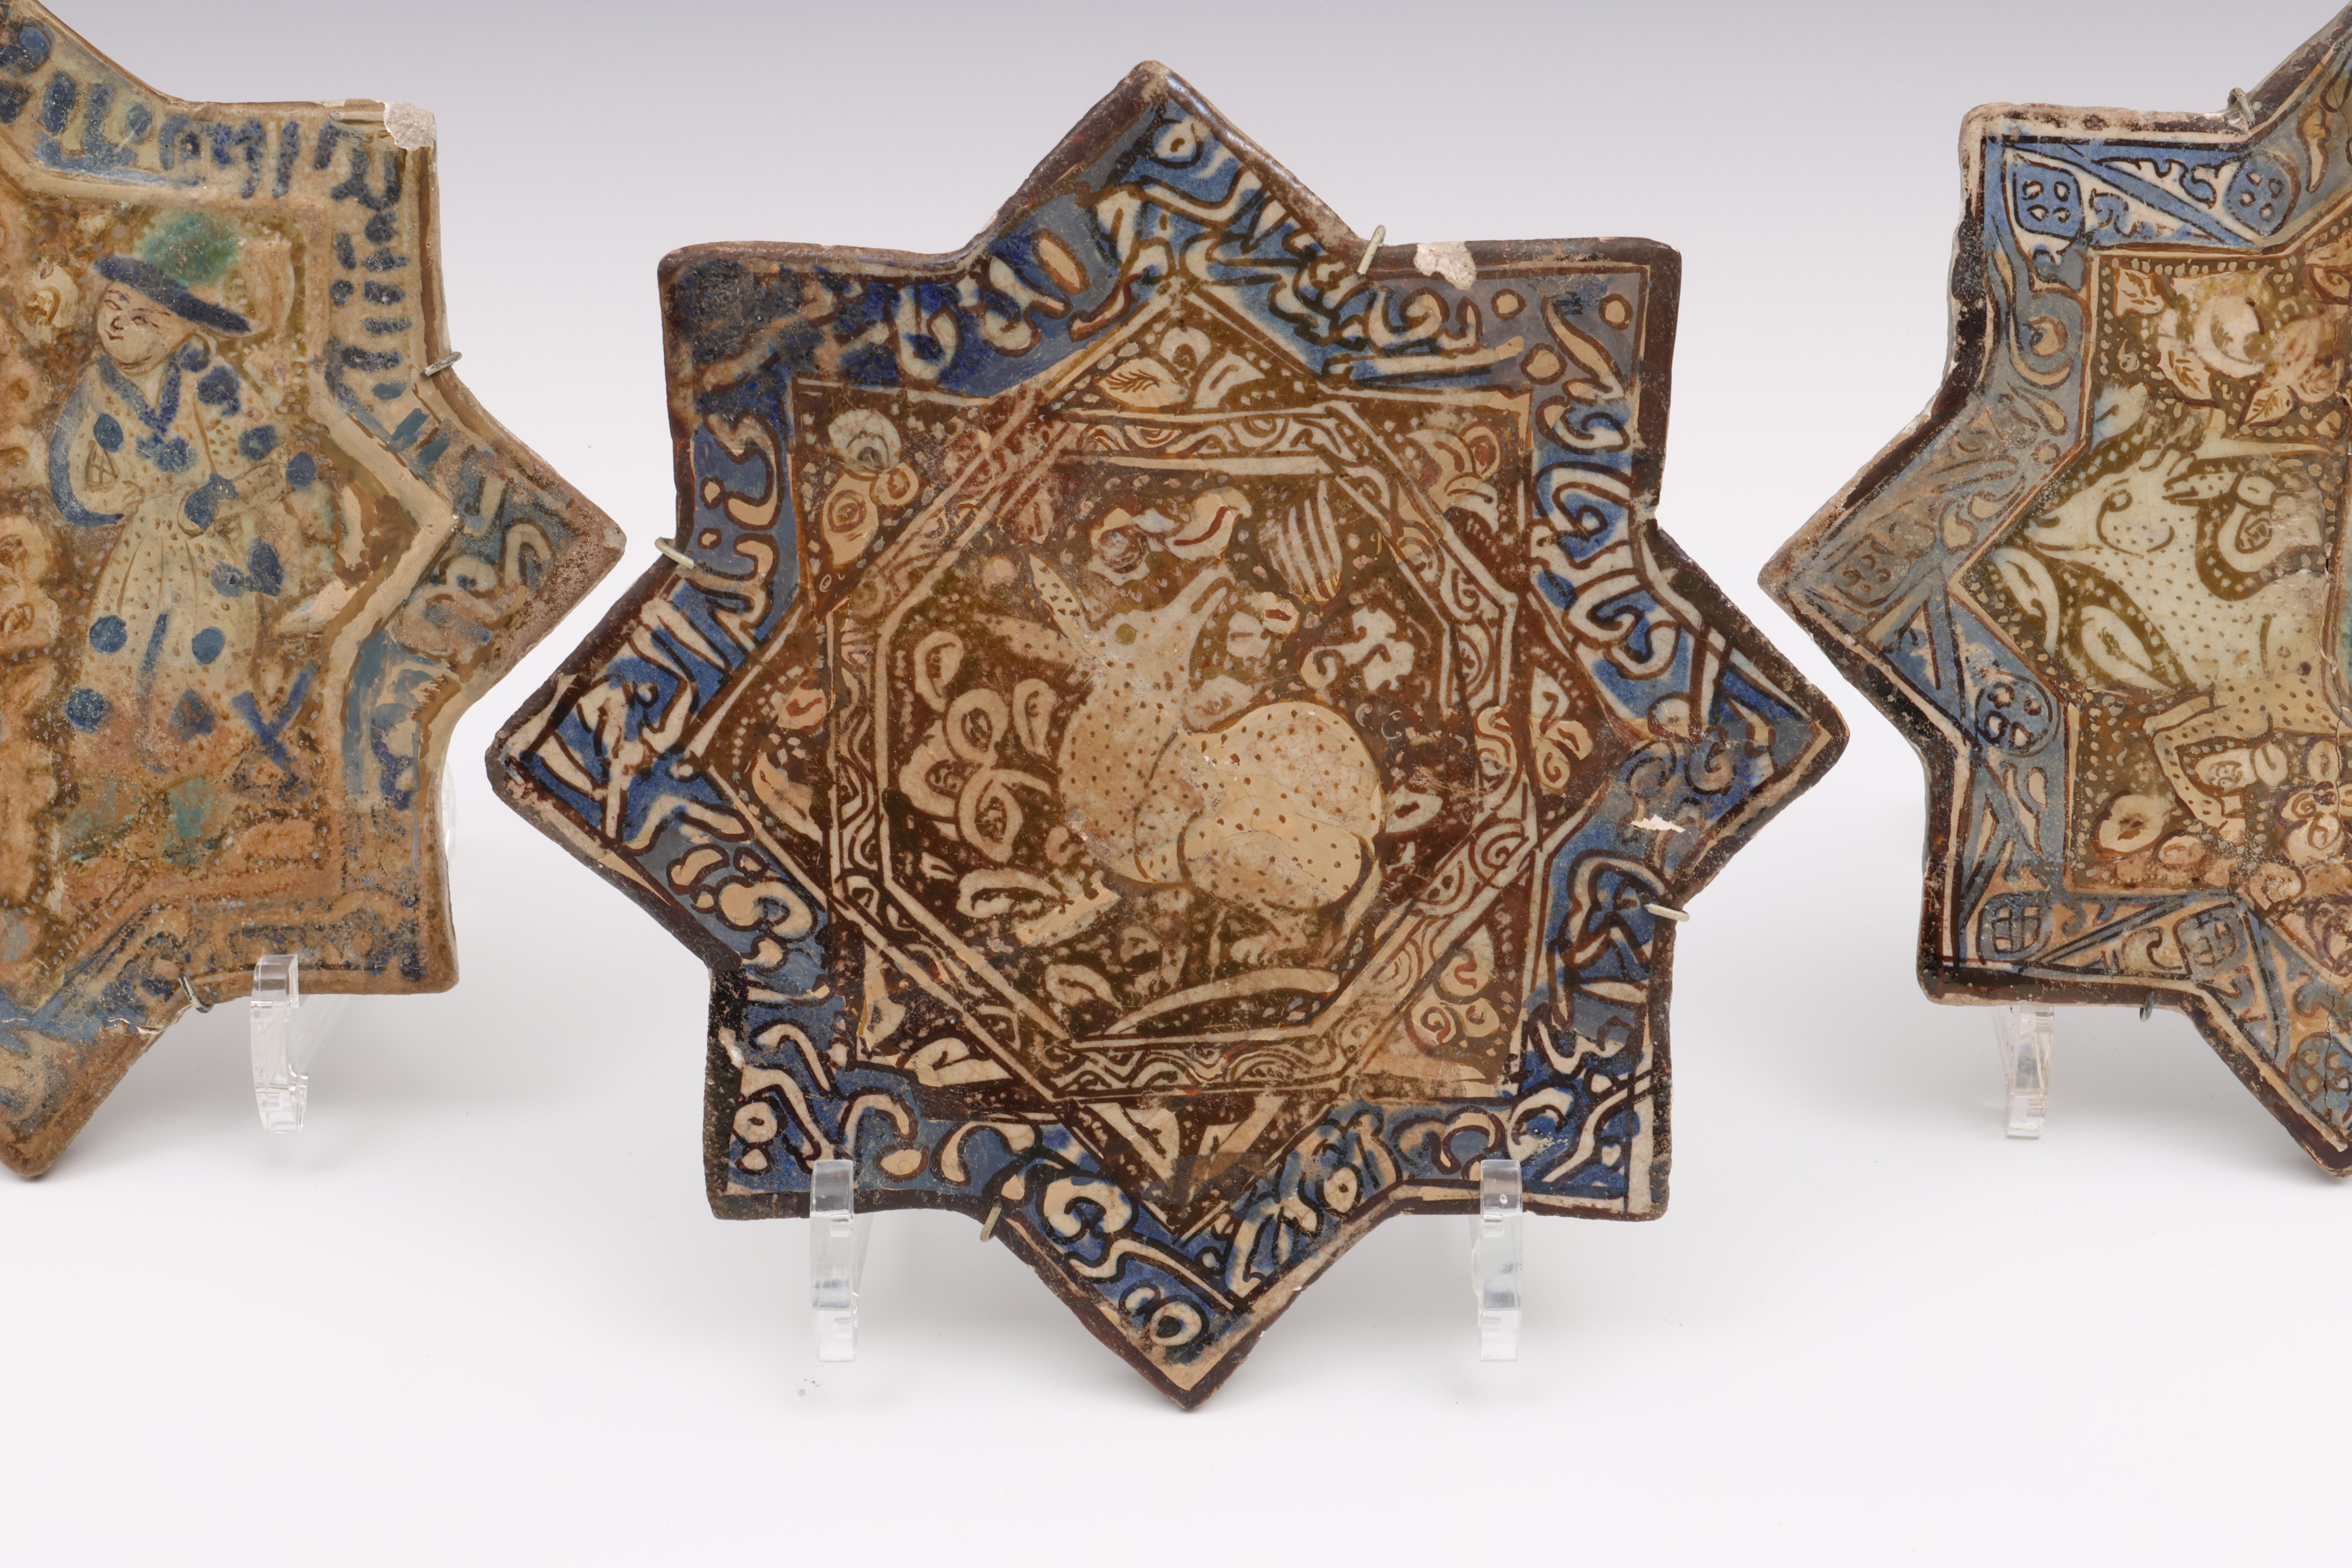 Persia, three star shaped tiles, ca. 15th-17th century - Image 2 of 5